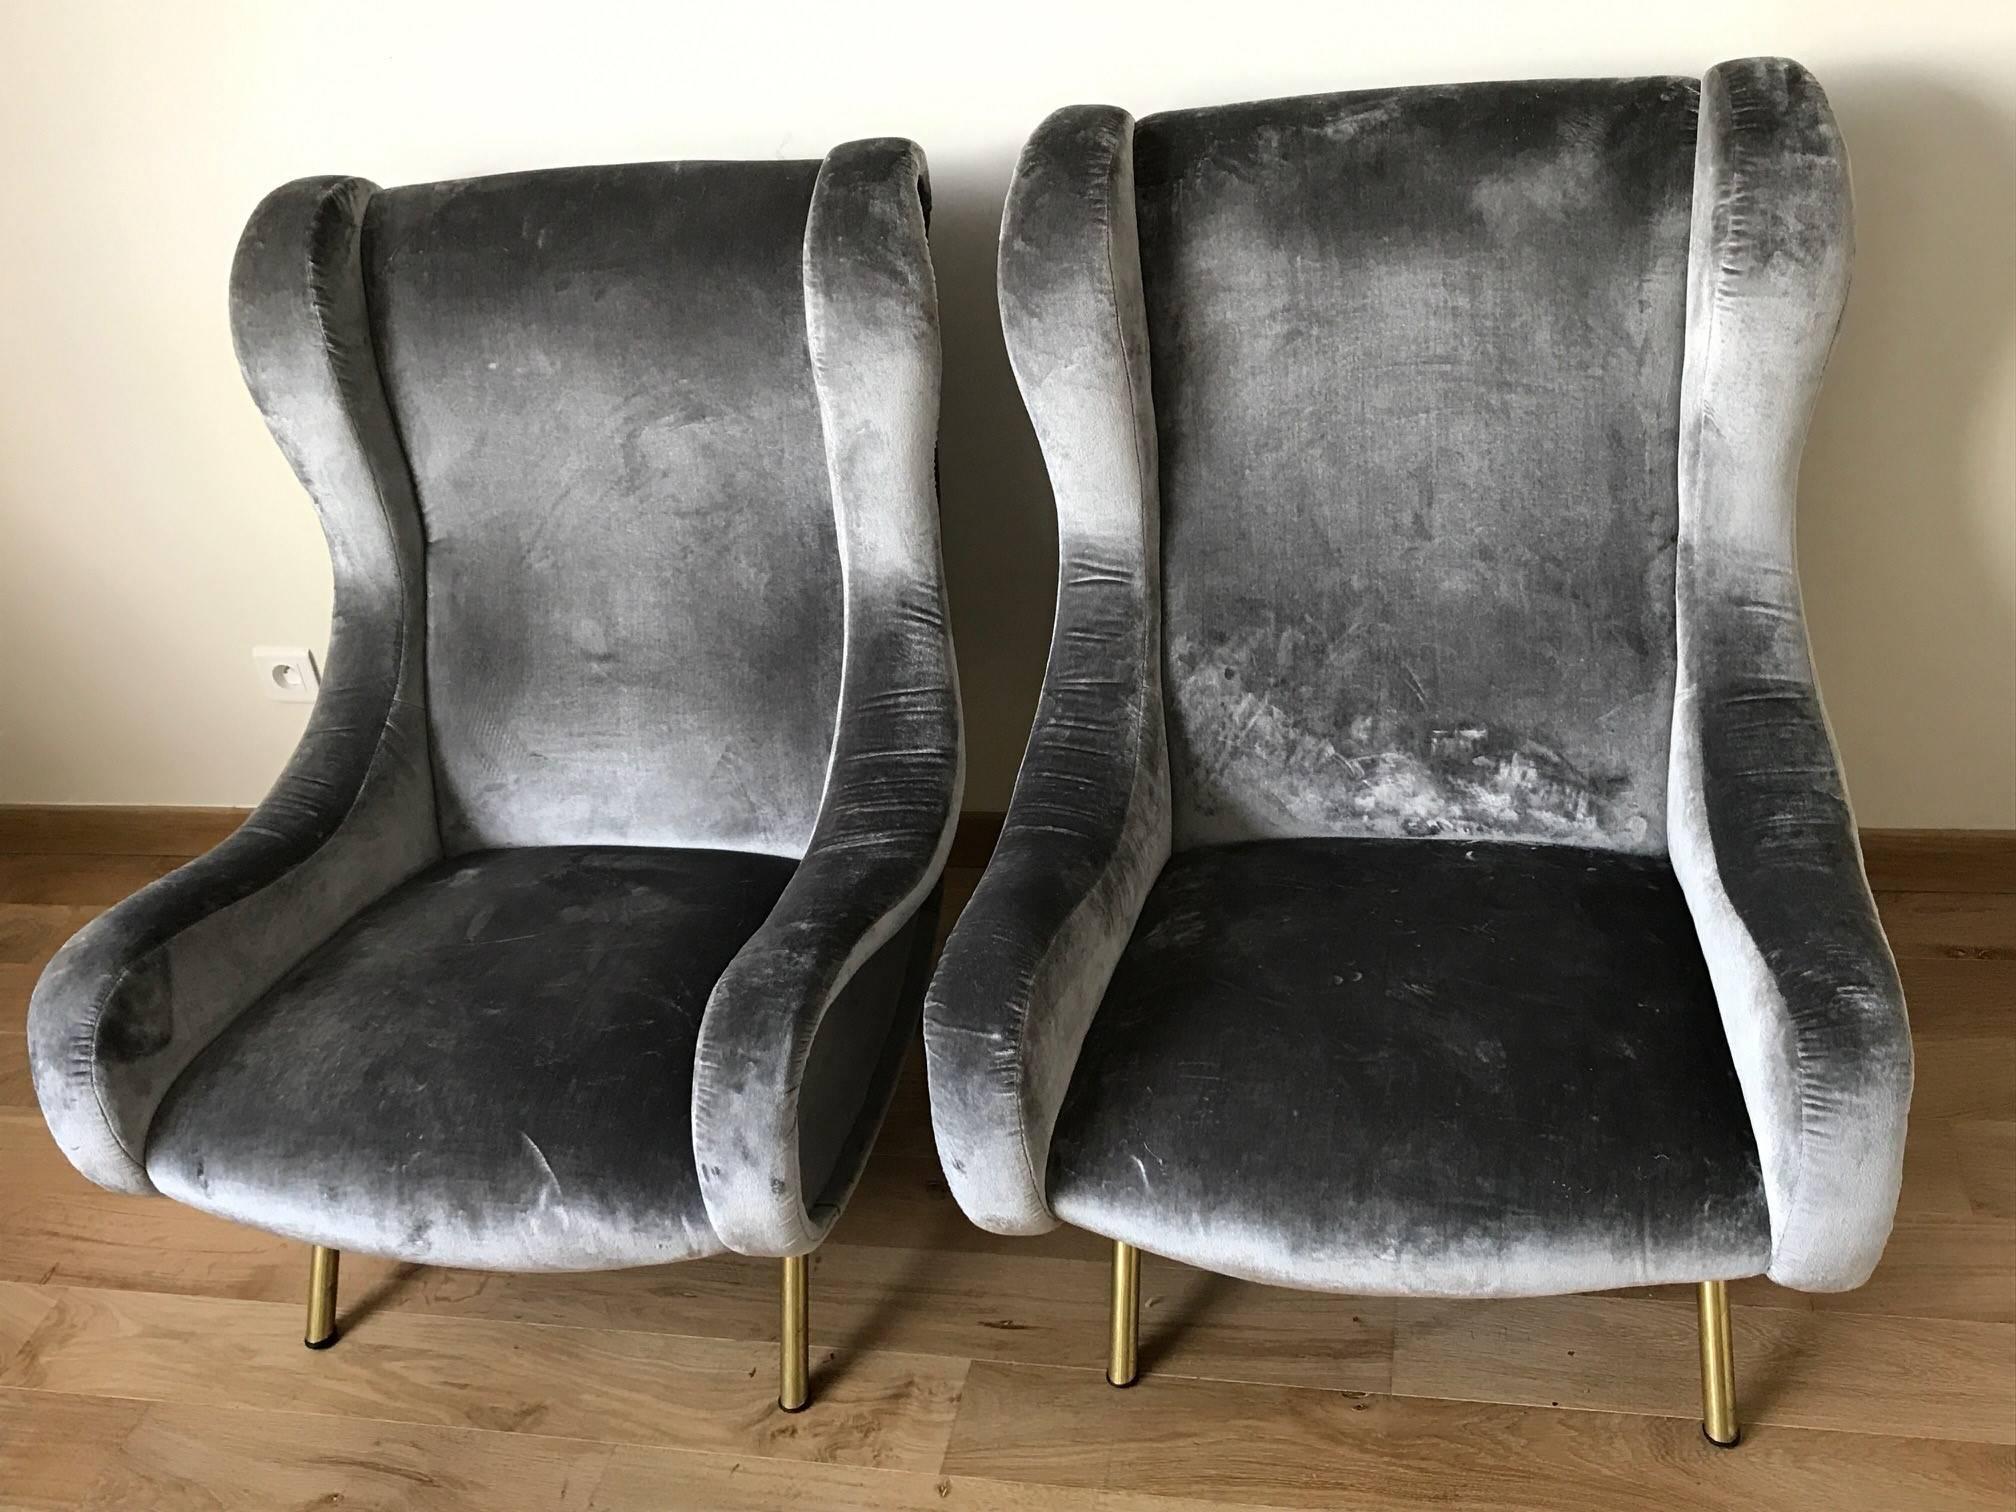 Pair of Senior armchairs by Marco Zanuso for Arflex, 1950s, recently re-upholstered in a blue-grey silk velvet by Holland & Cherry.